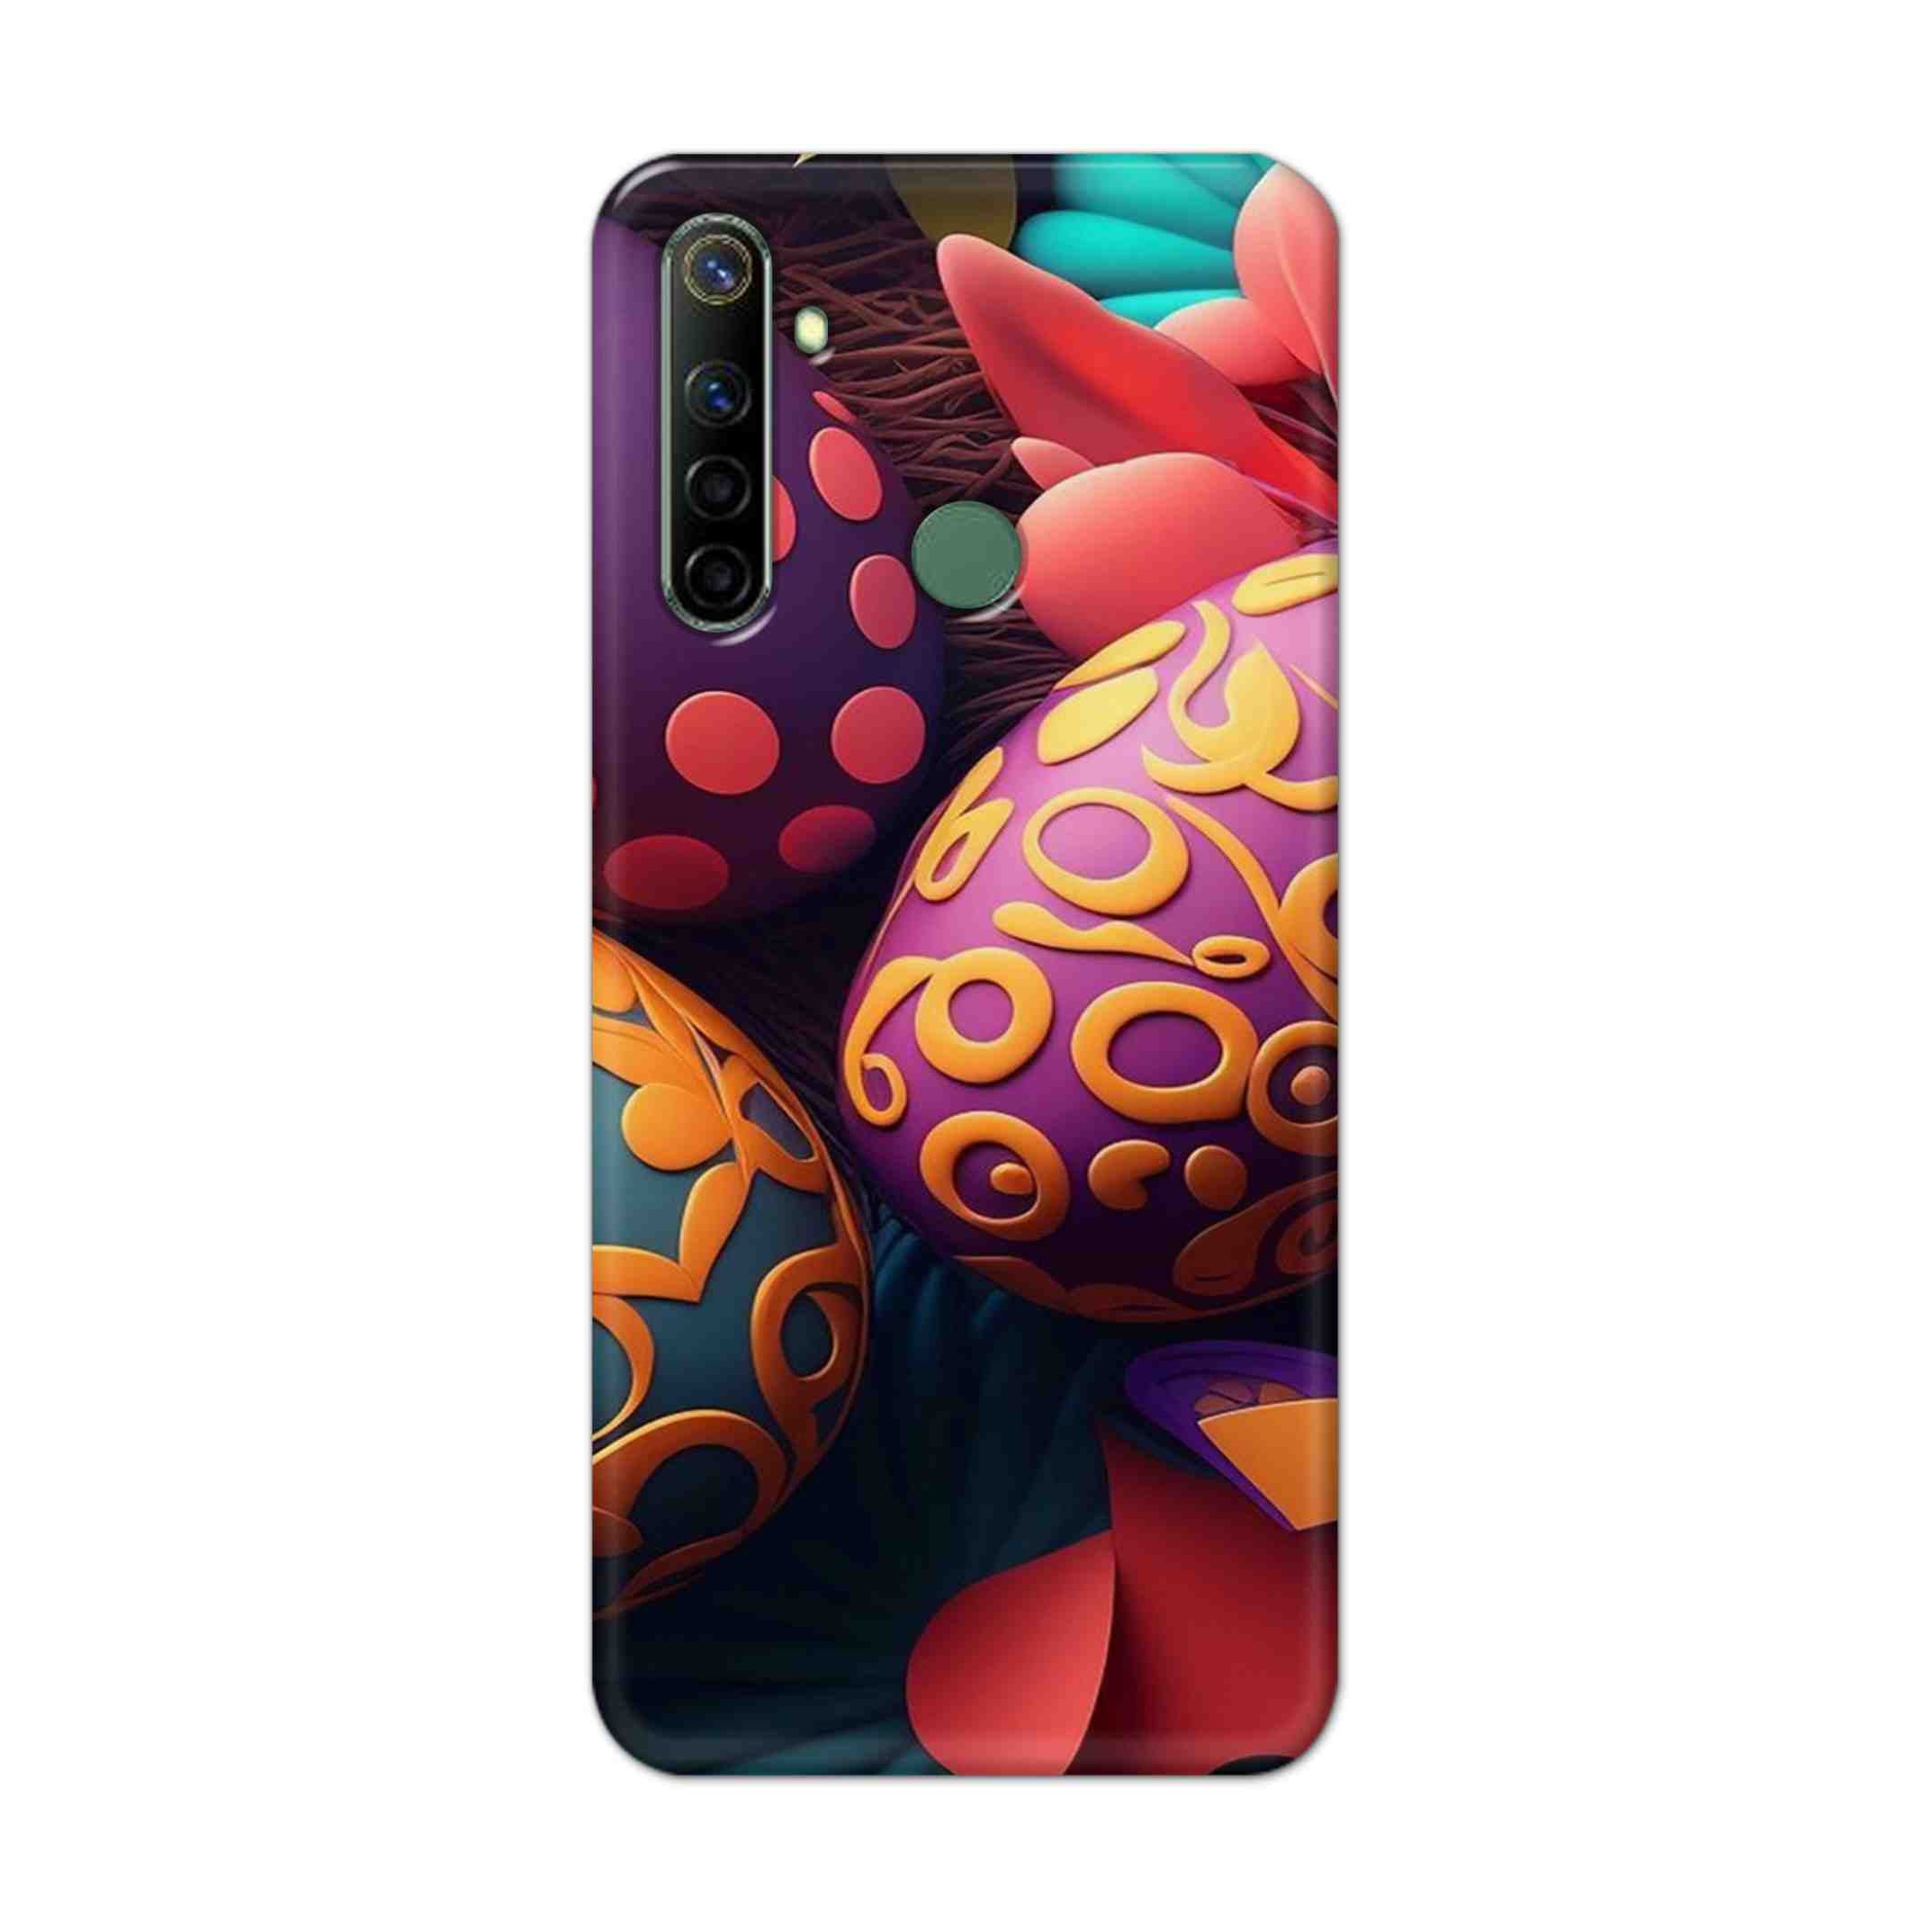 Buy Easter Egg Hard Back Mobile Phone Case Cover For Realme Narzo 10a Online